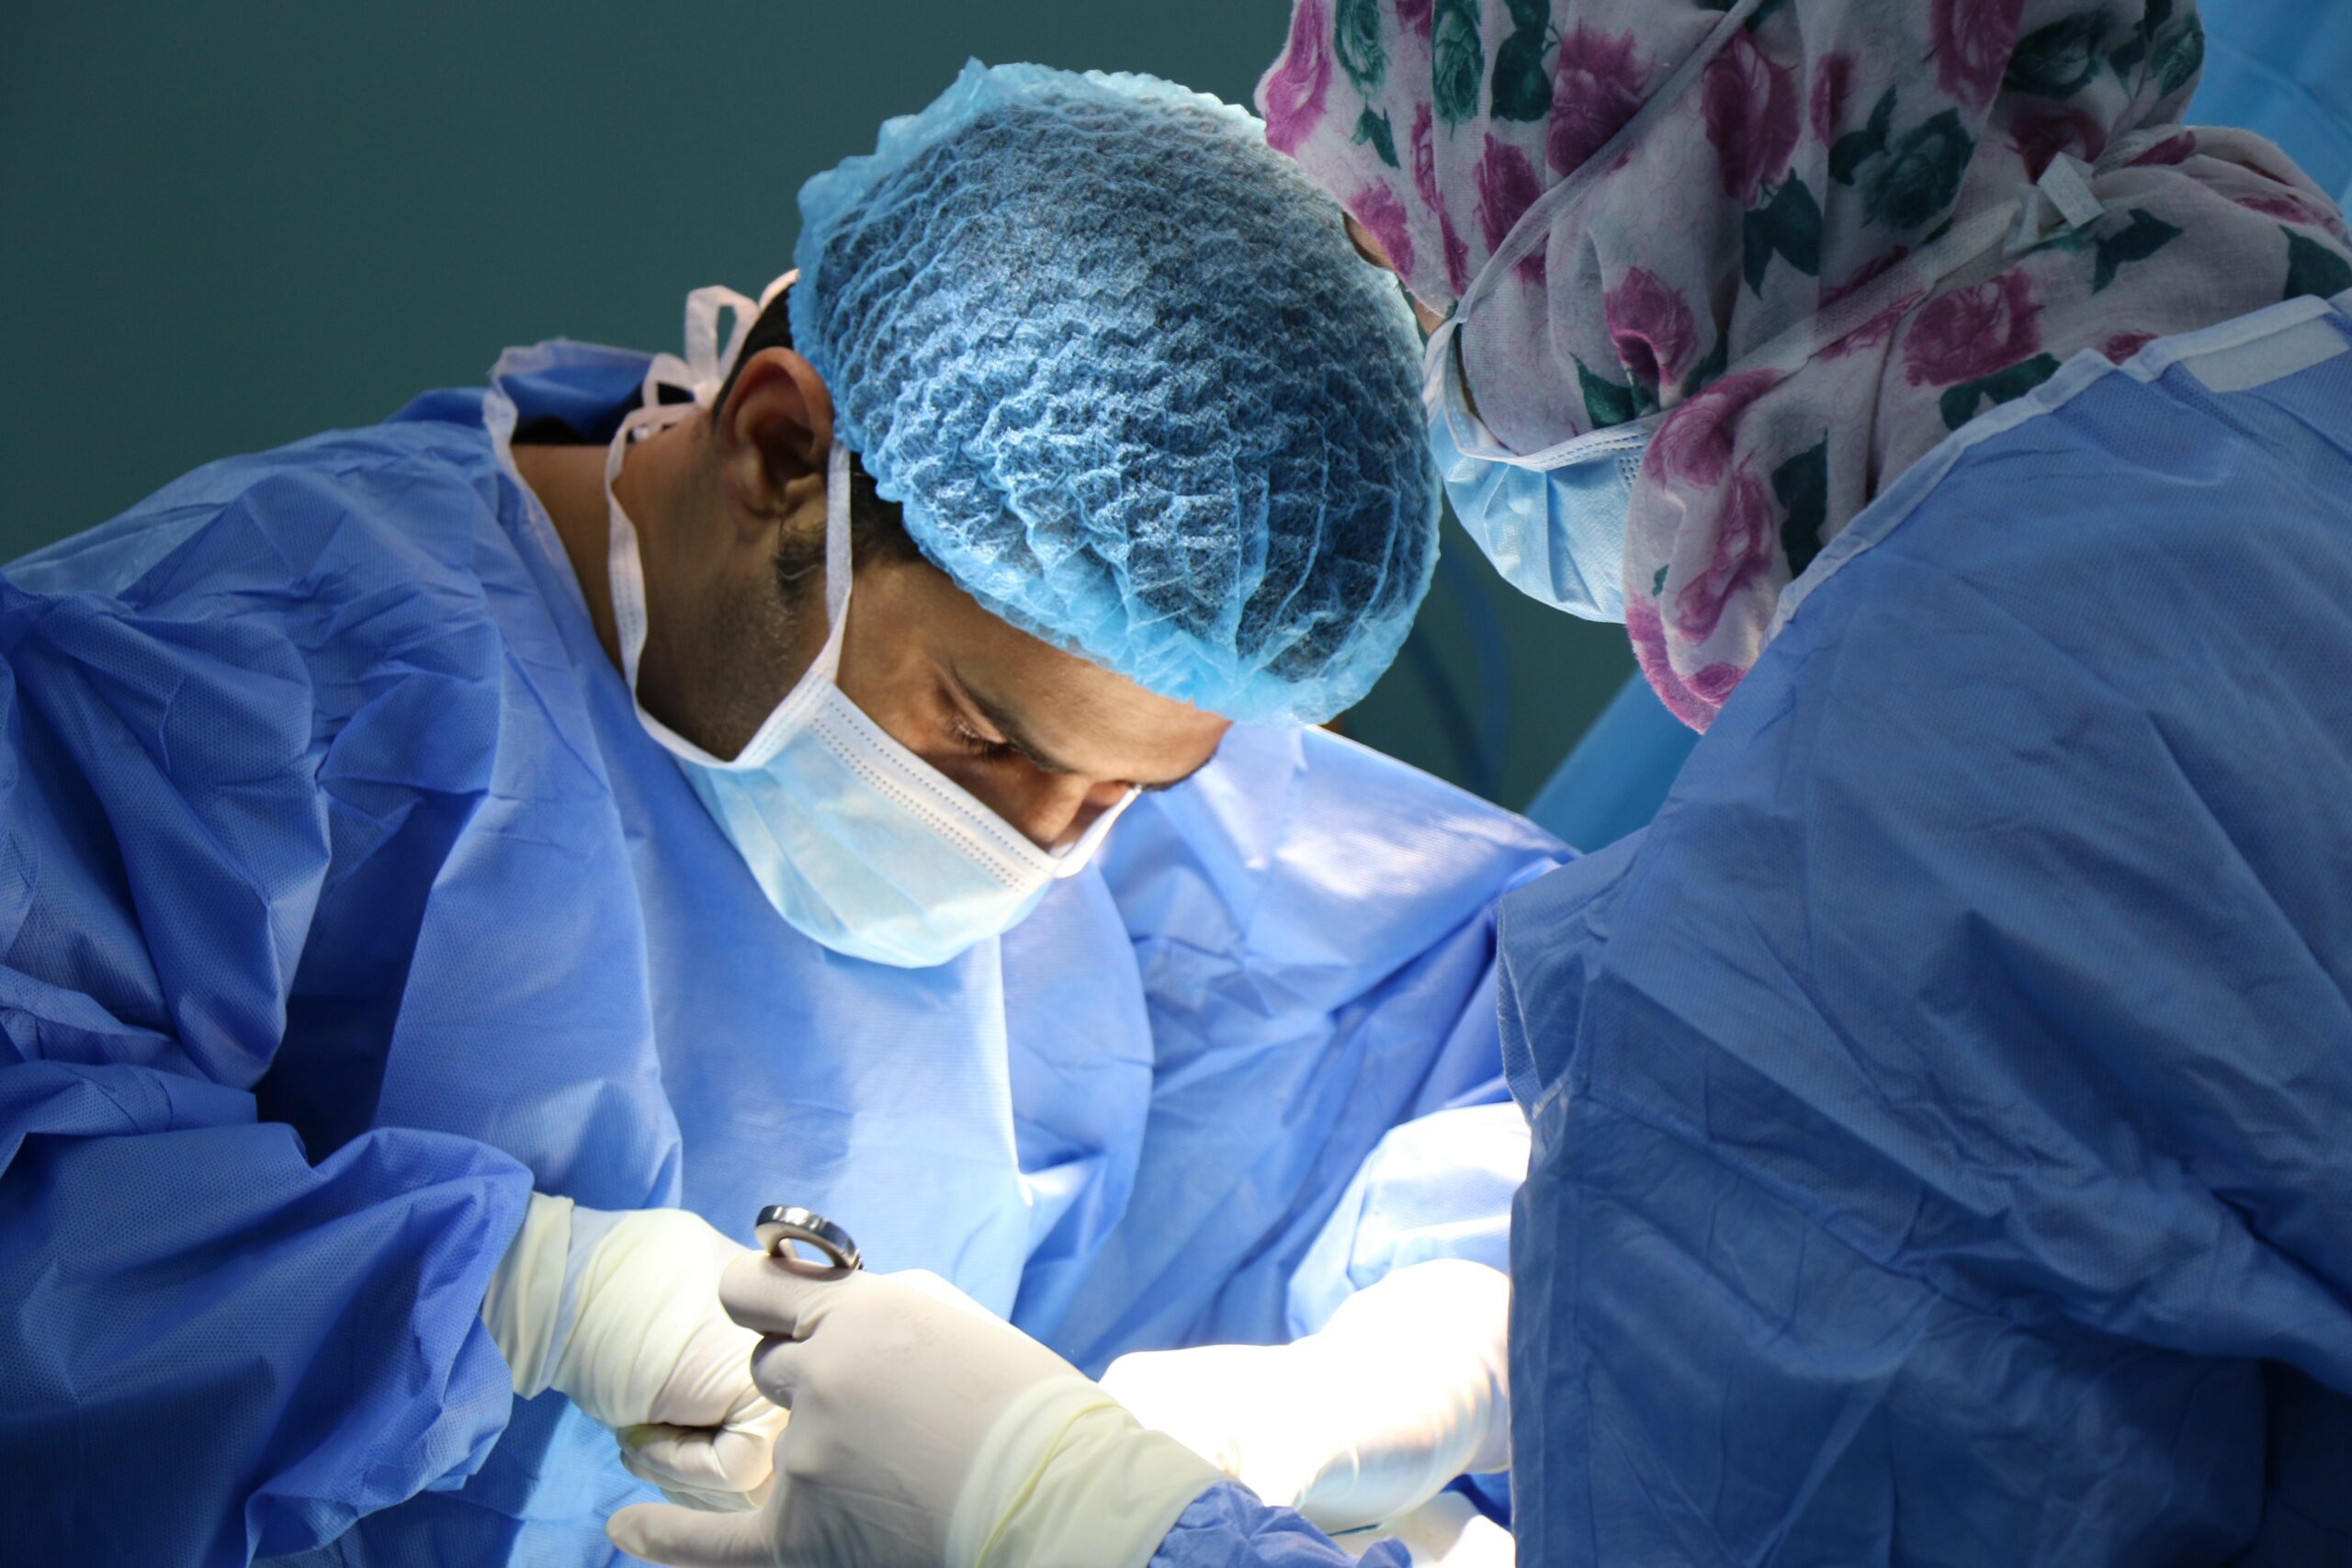 Doctor conducting surgery with another healthcare staff holding forceps